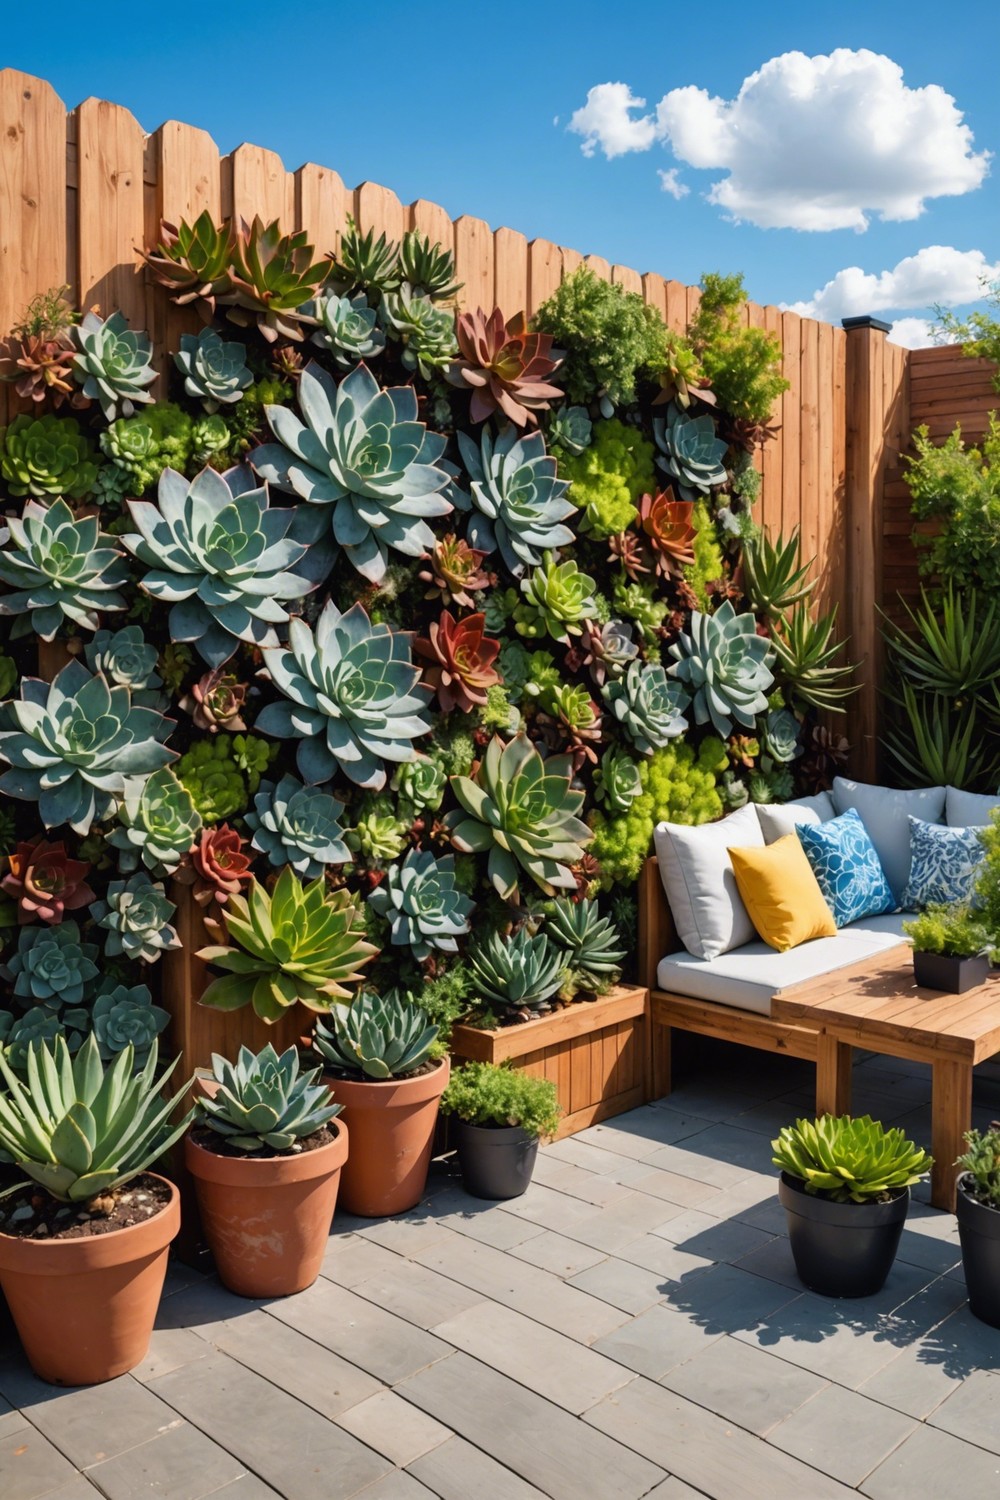 Succulent Walls for a Dramatic Statement Piece